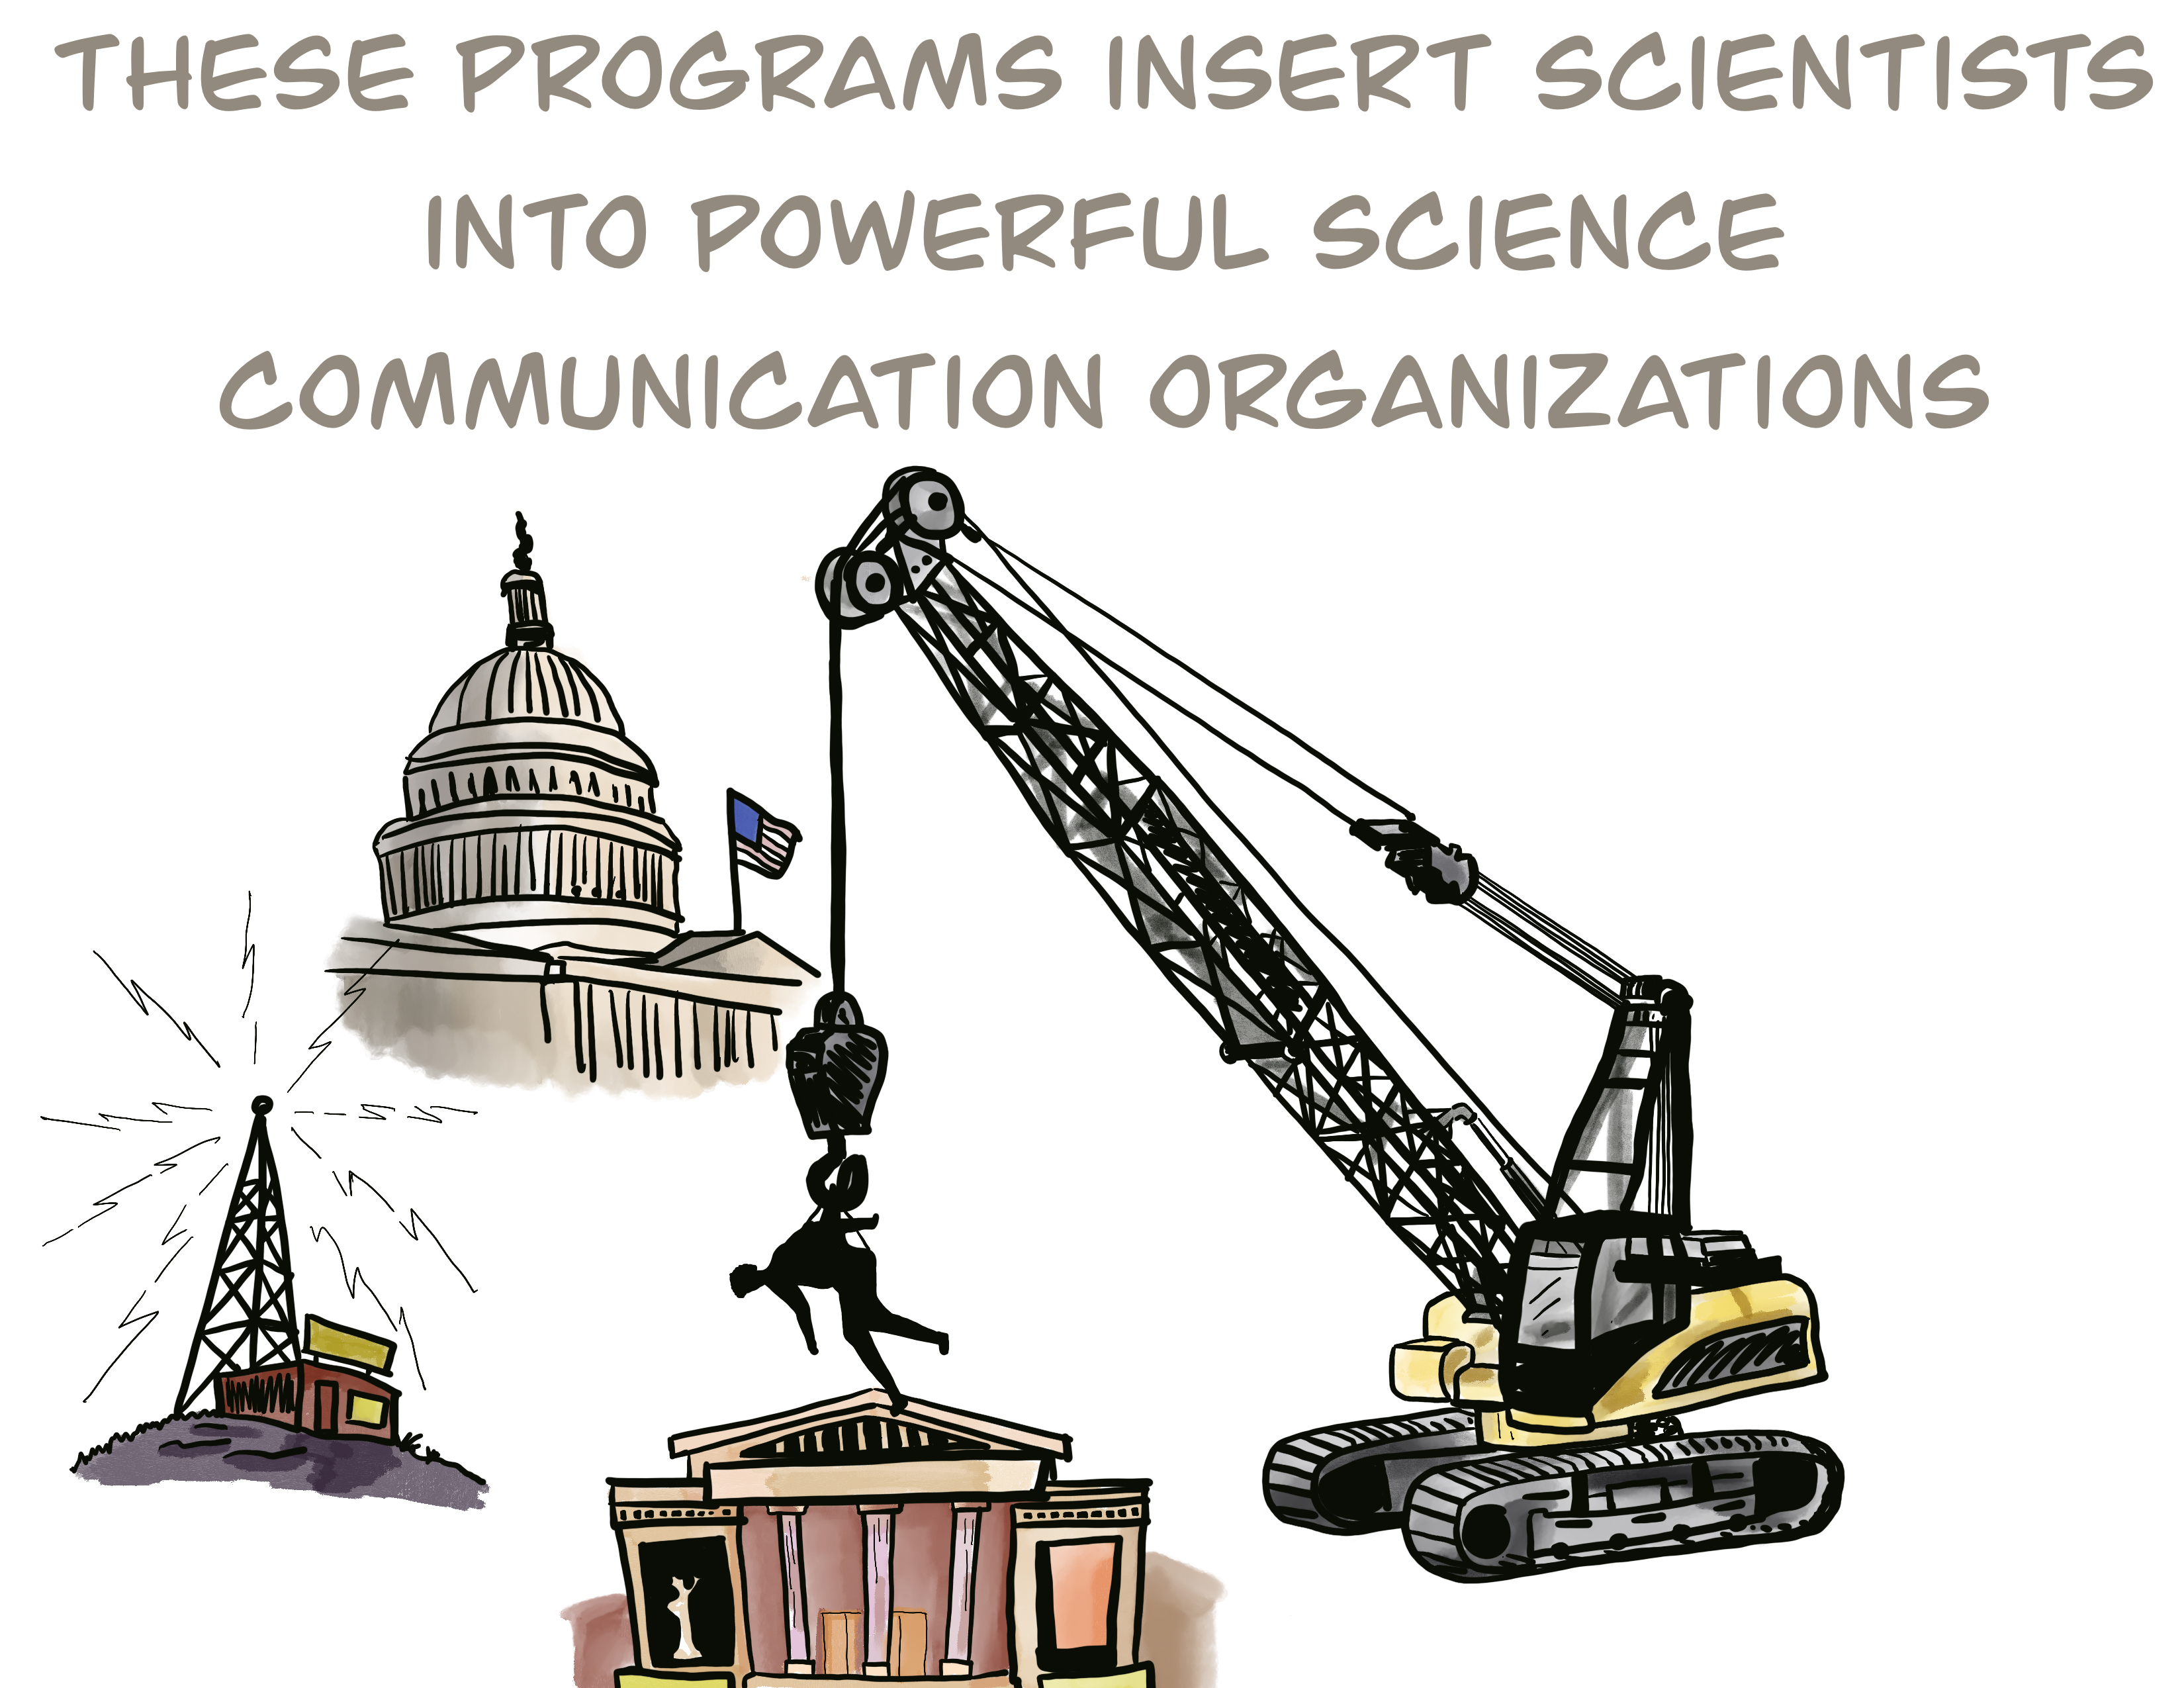 These programs insert scientists into powerful science communication organizations